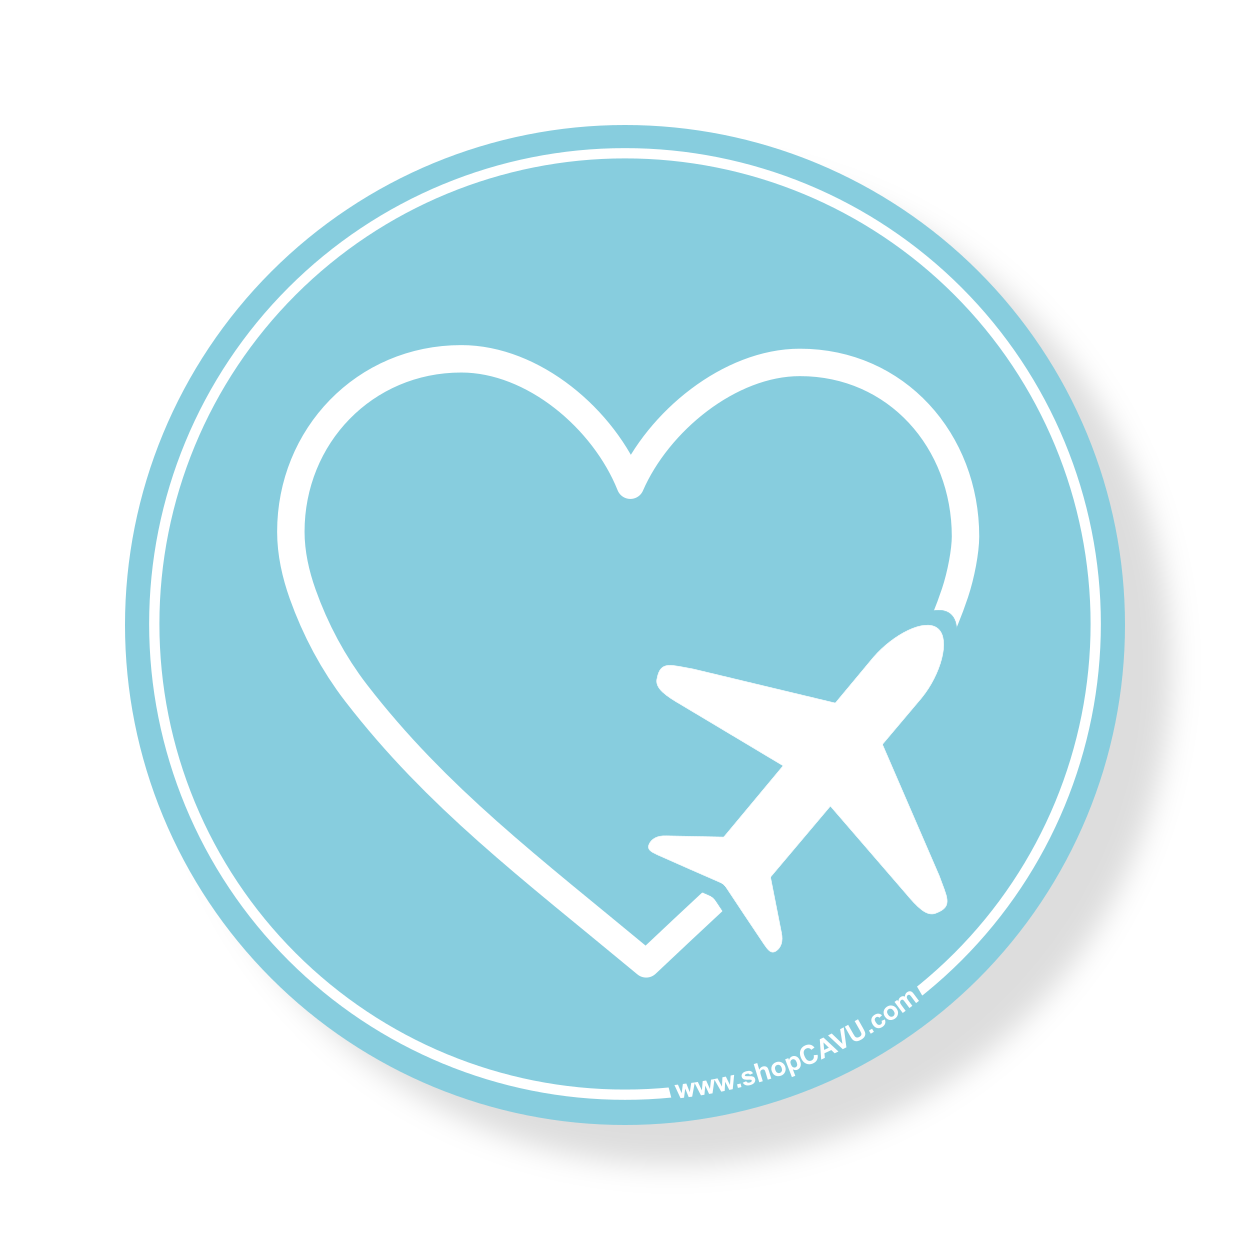 Sticker/Decal - I Heart Airplanes 2" Sky Blue